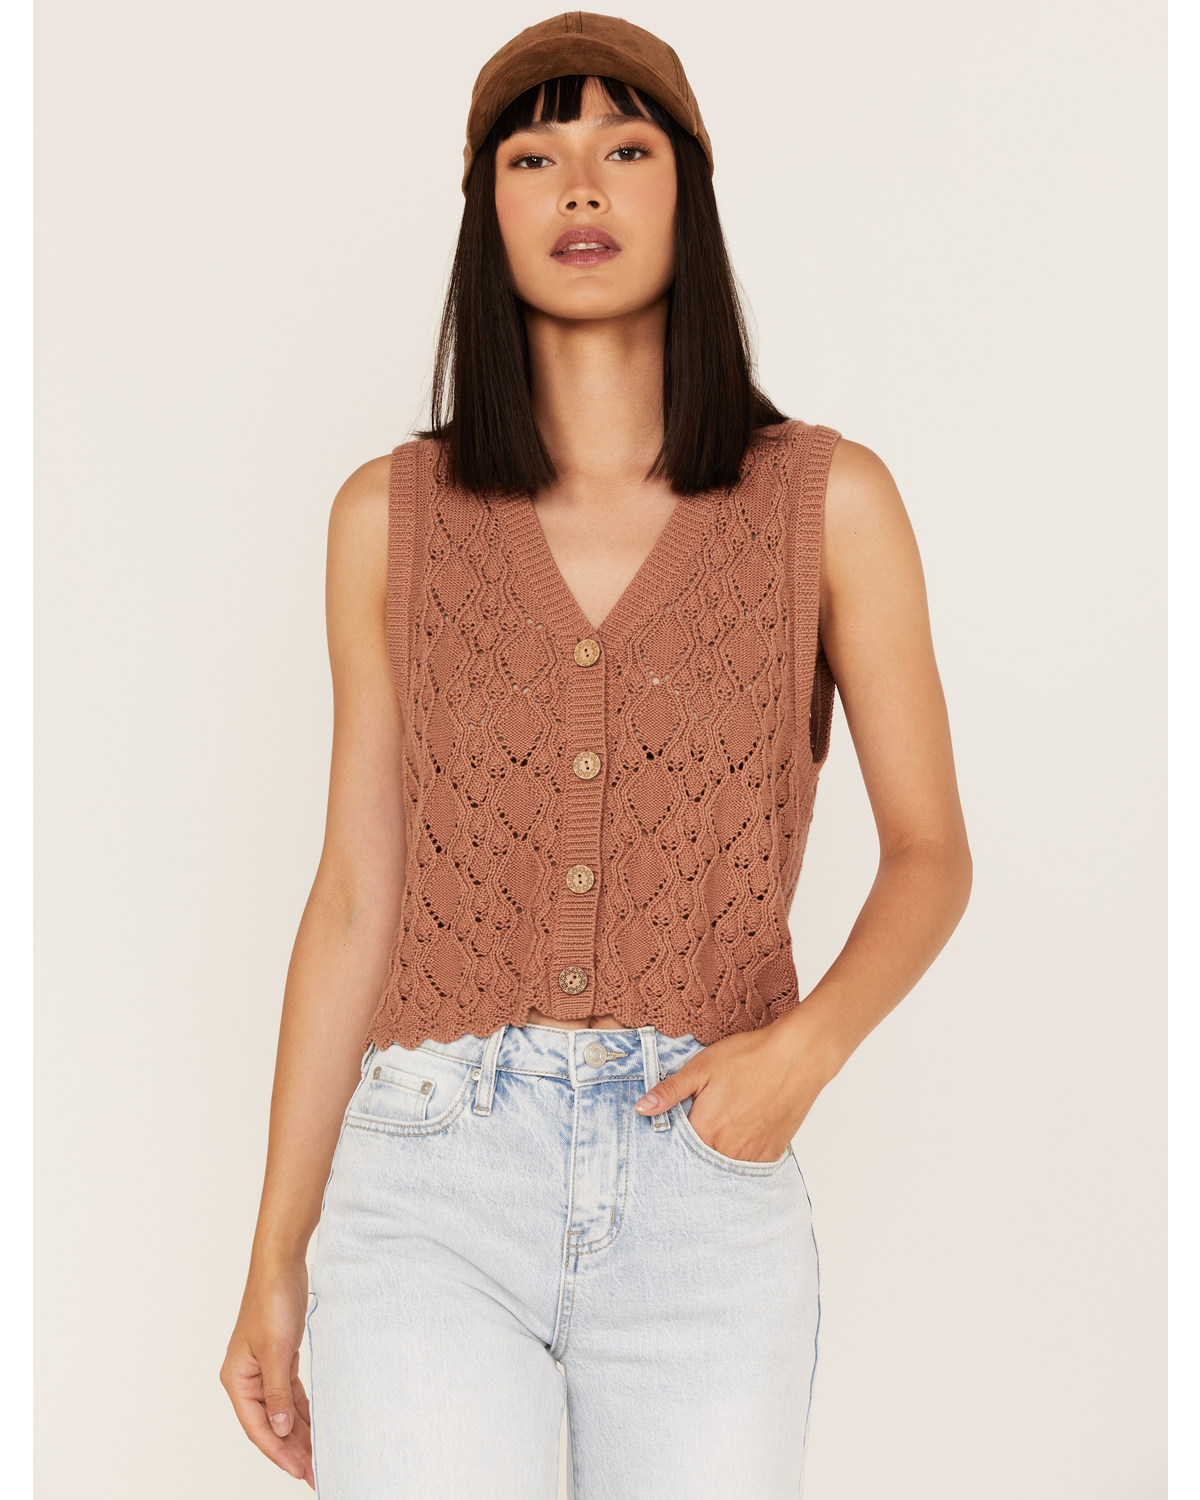 Cleo + Wolf Women's Cropped Knit Sweater Vest